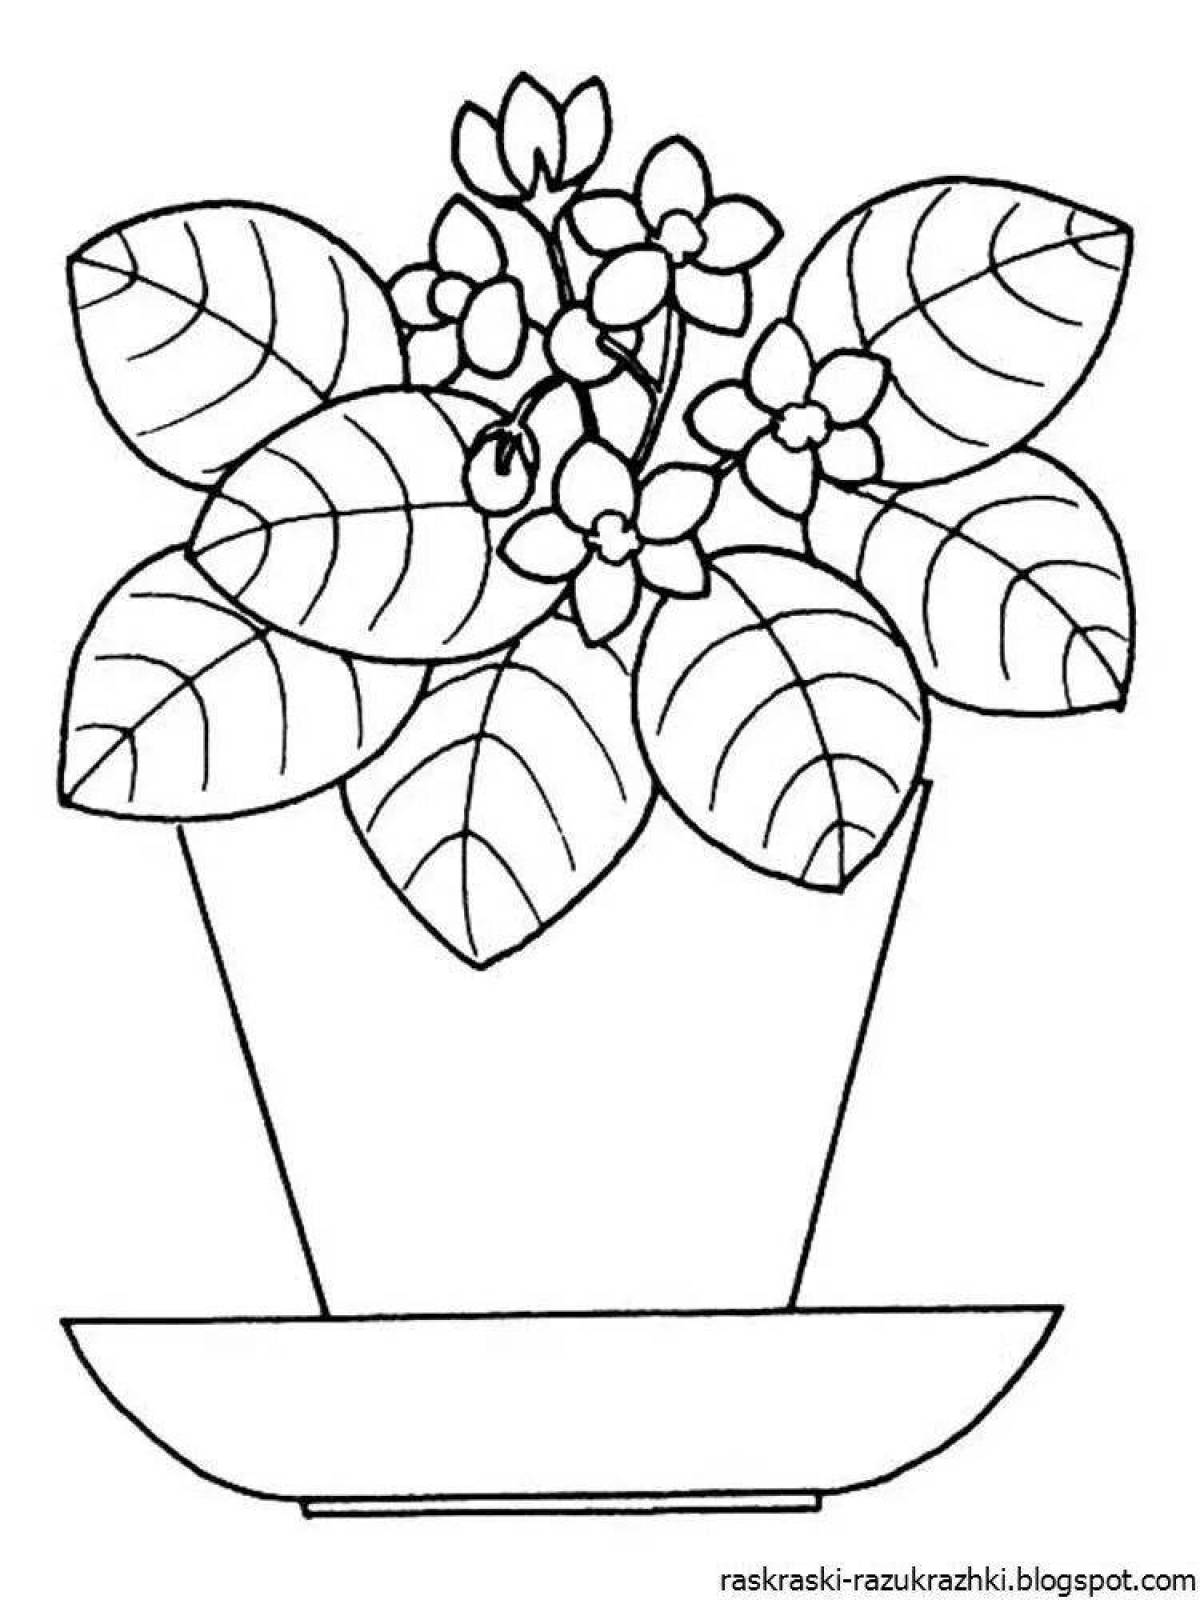 Grand coloring page senior group indoor plants